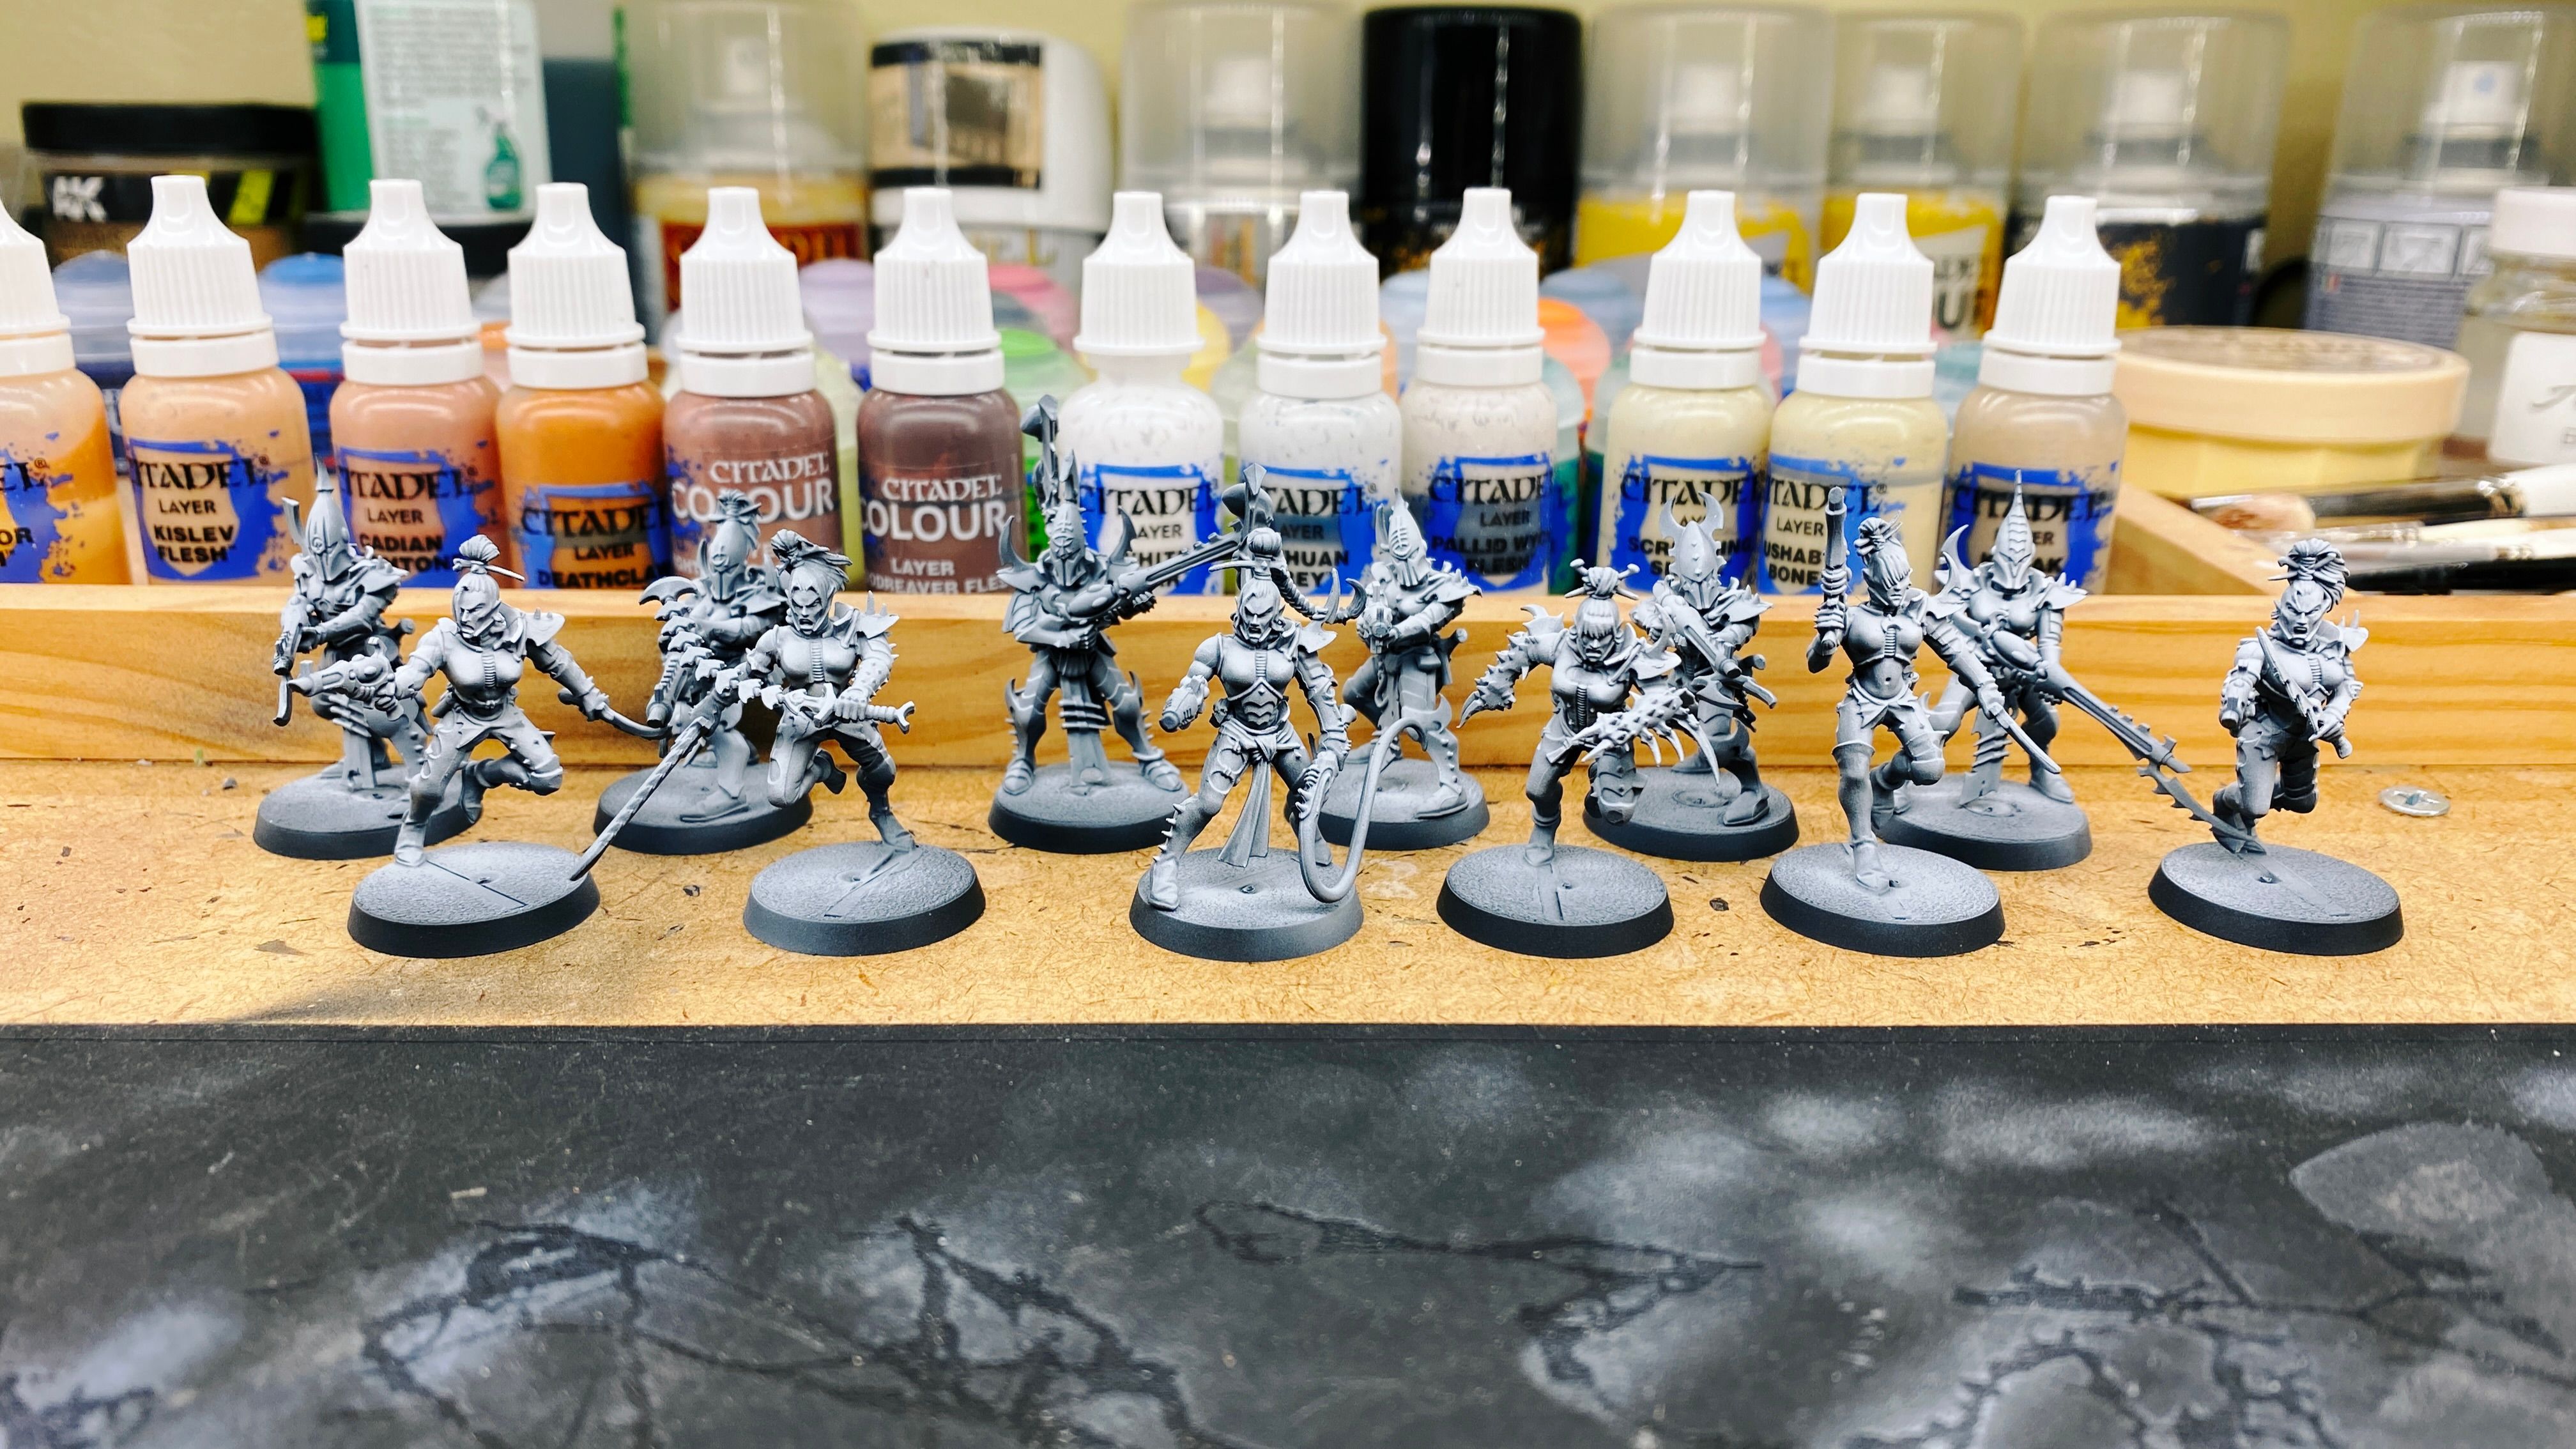 A photo of six assembled and undercoated miniatures. Drukhari are basically evil space elves, the ones at the back (the Kabalites) all have spiky armour and helmets and are pointing spiky-looking guns, and the ones at the front (the Wyches) are much more lightly armoured (but still spiky) and have knives and pistols.